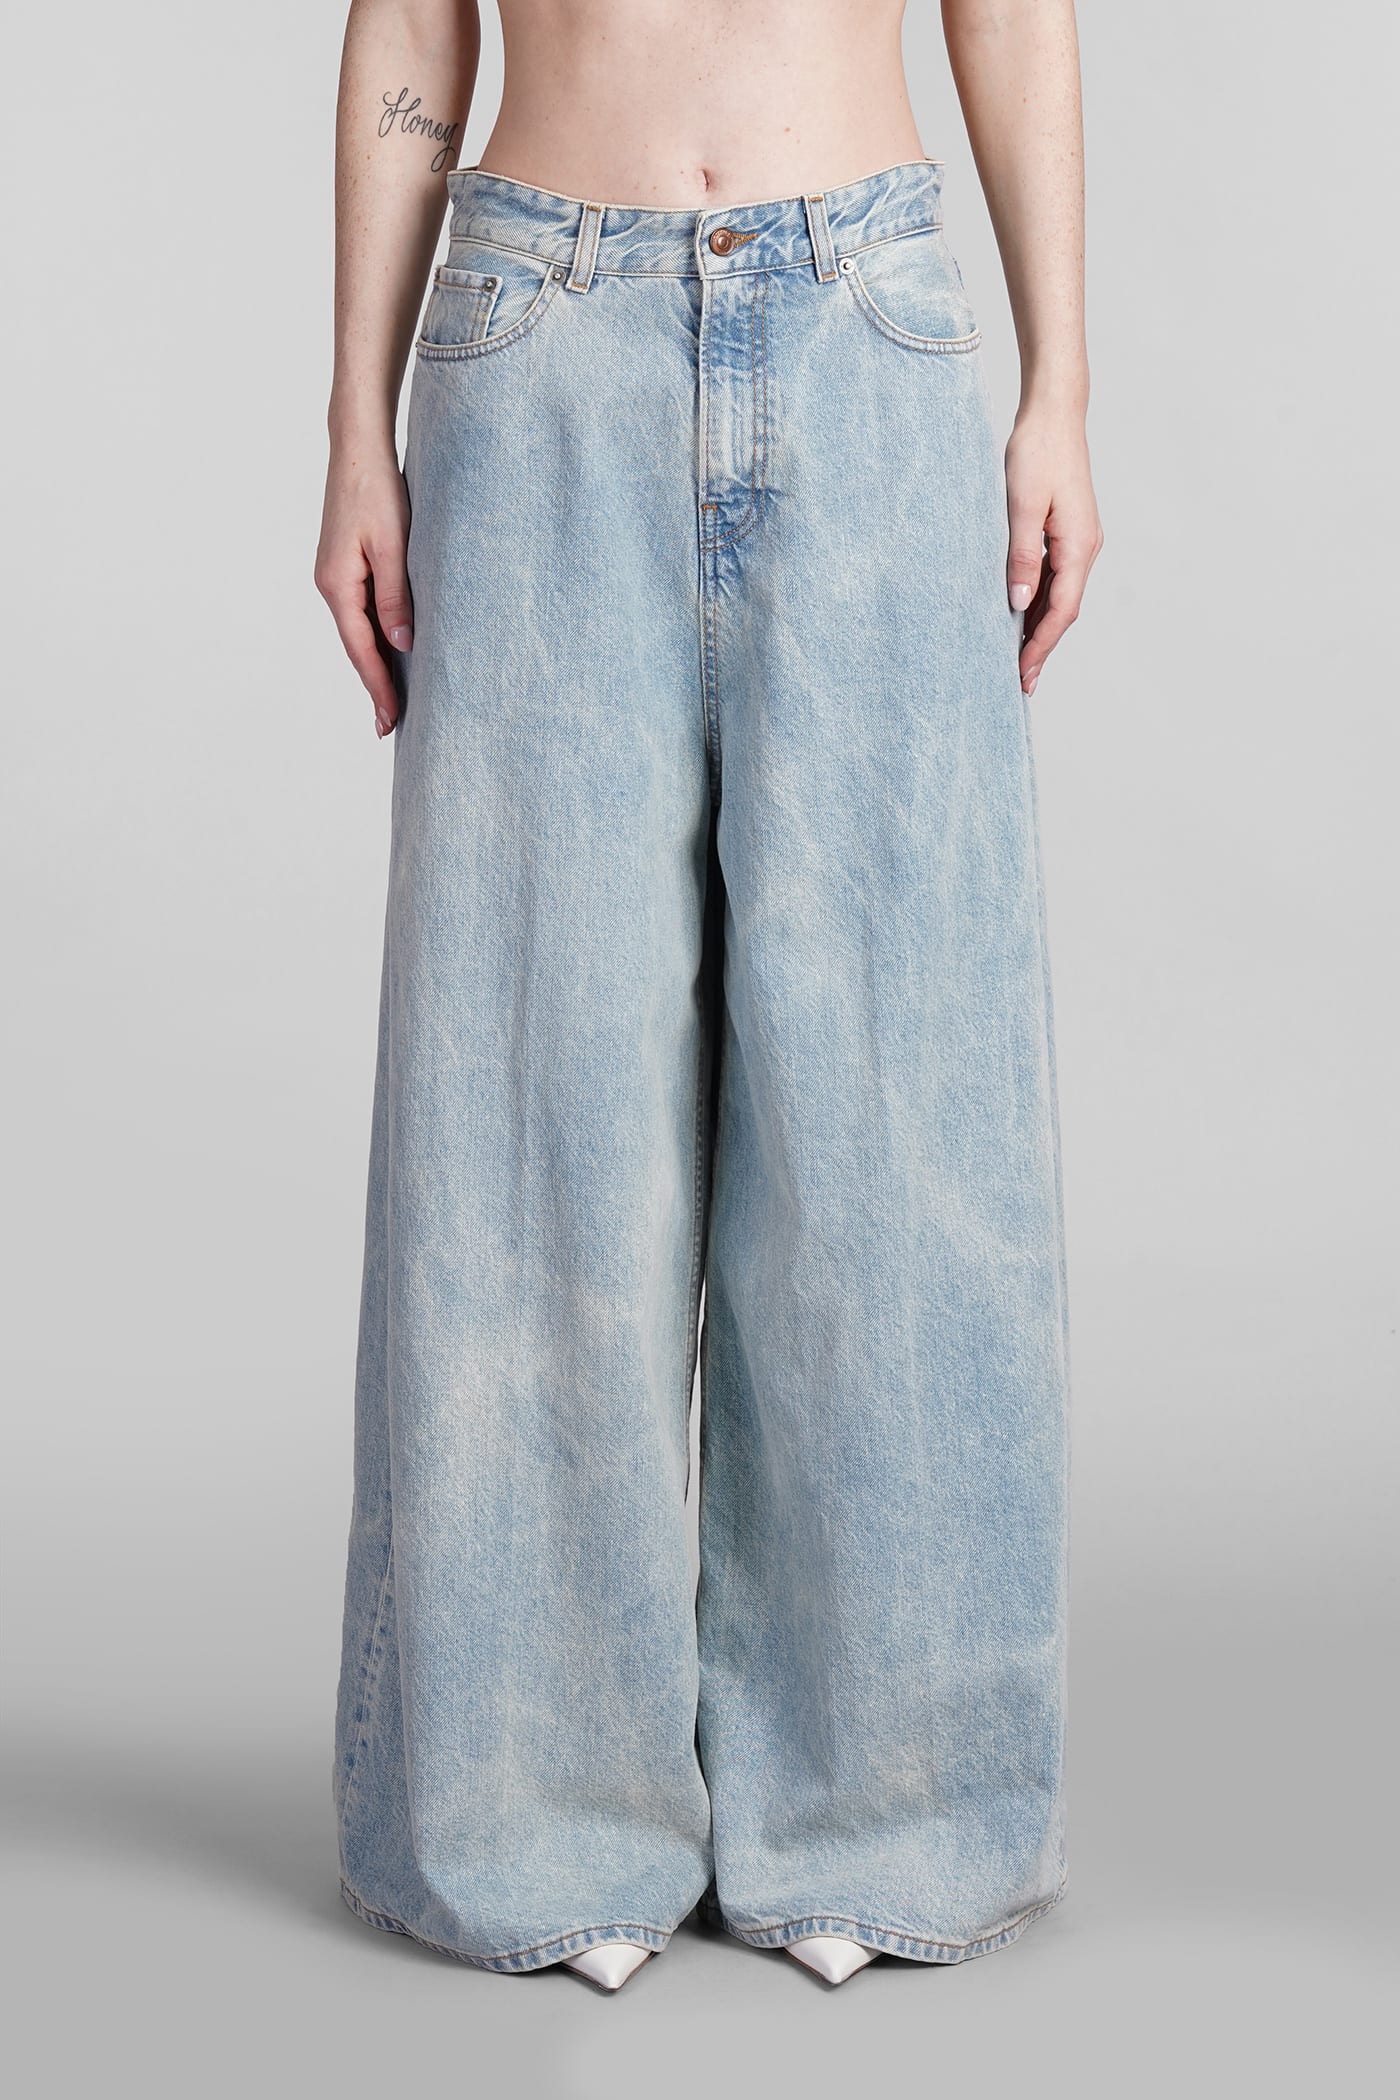 Big Bethany Jeans In Blue Cotton